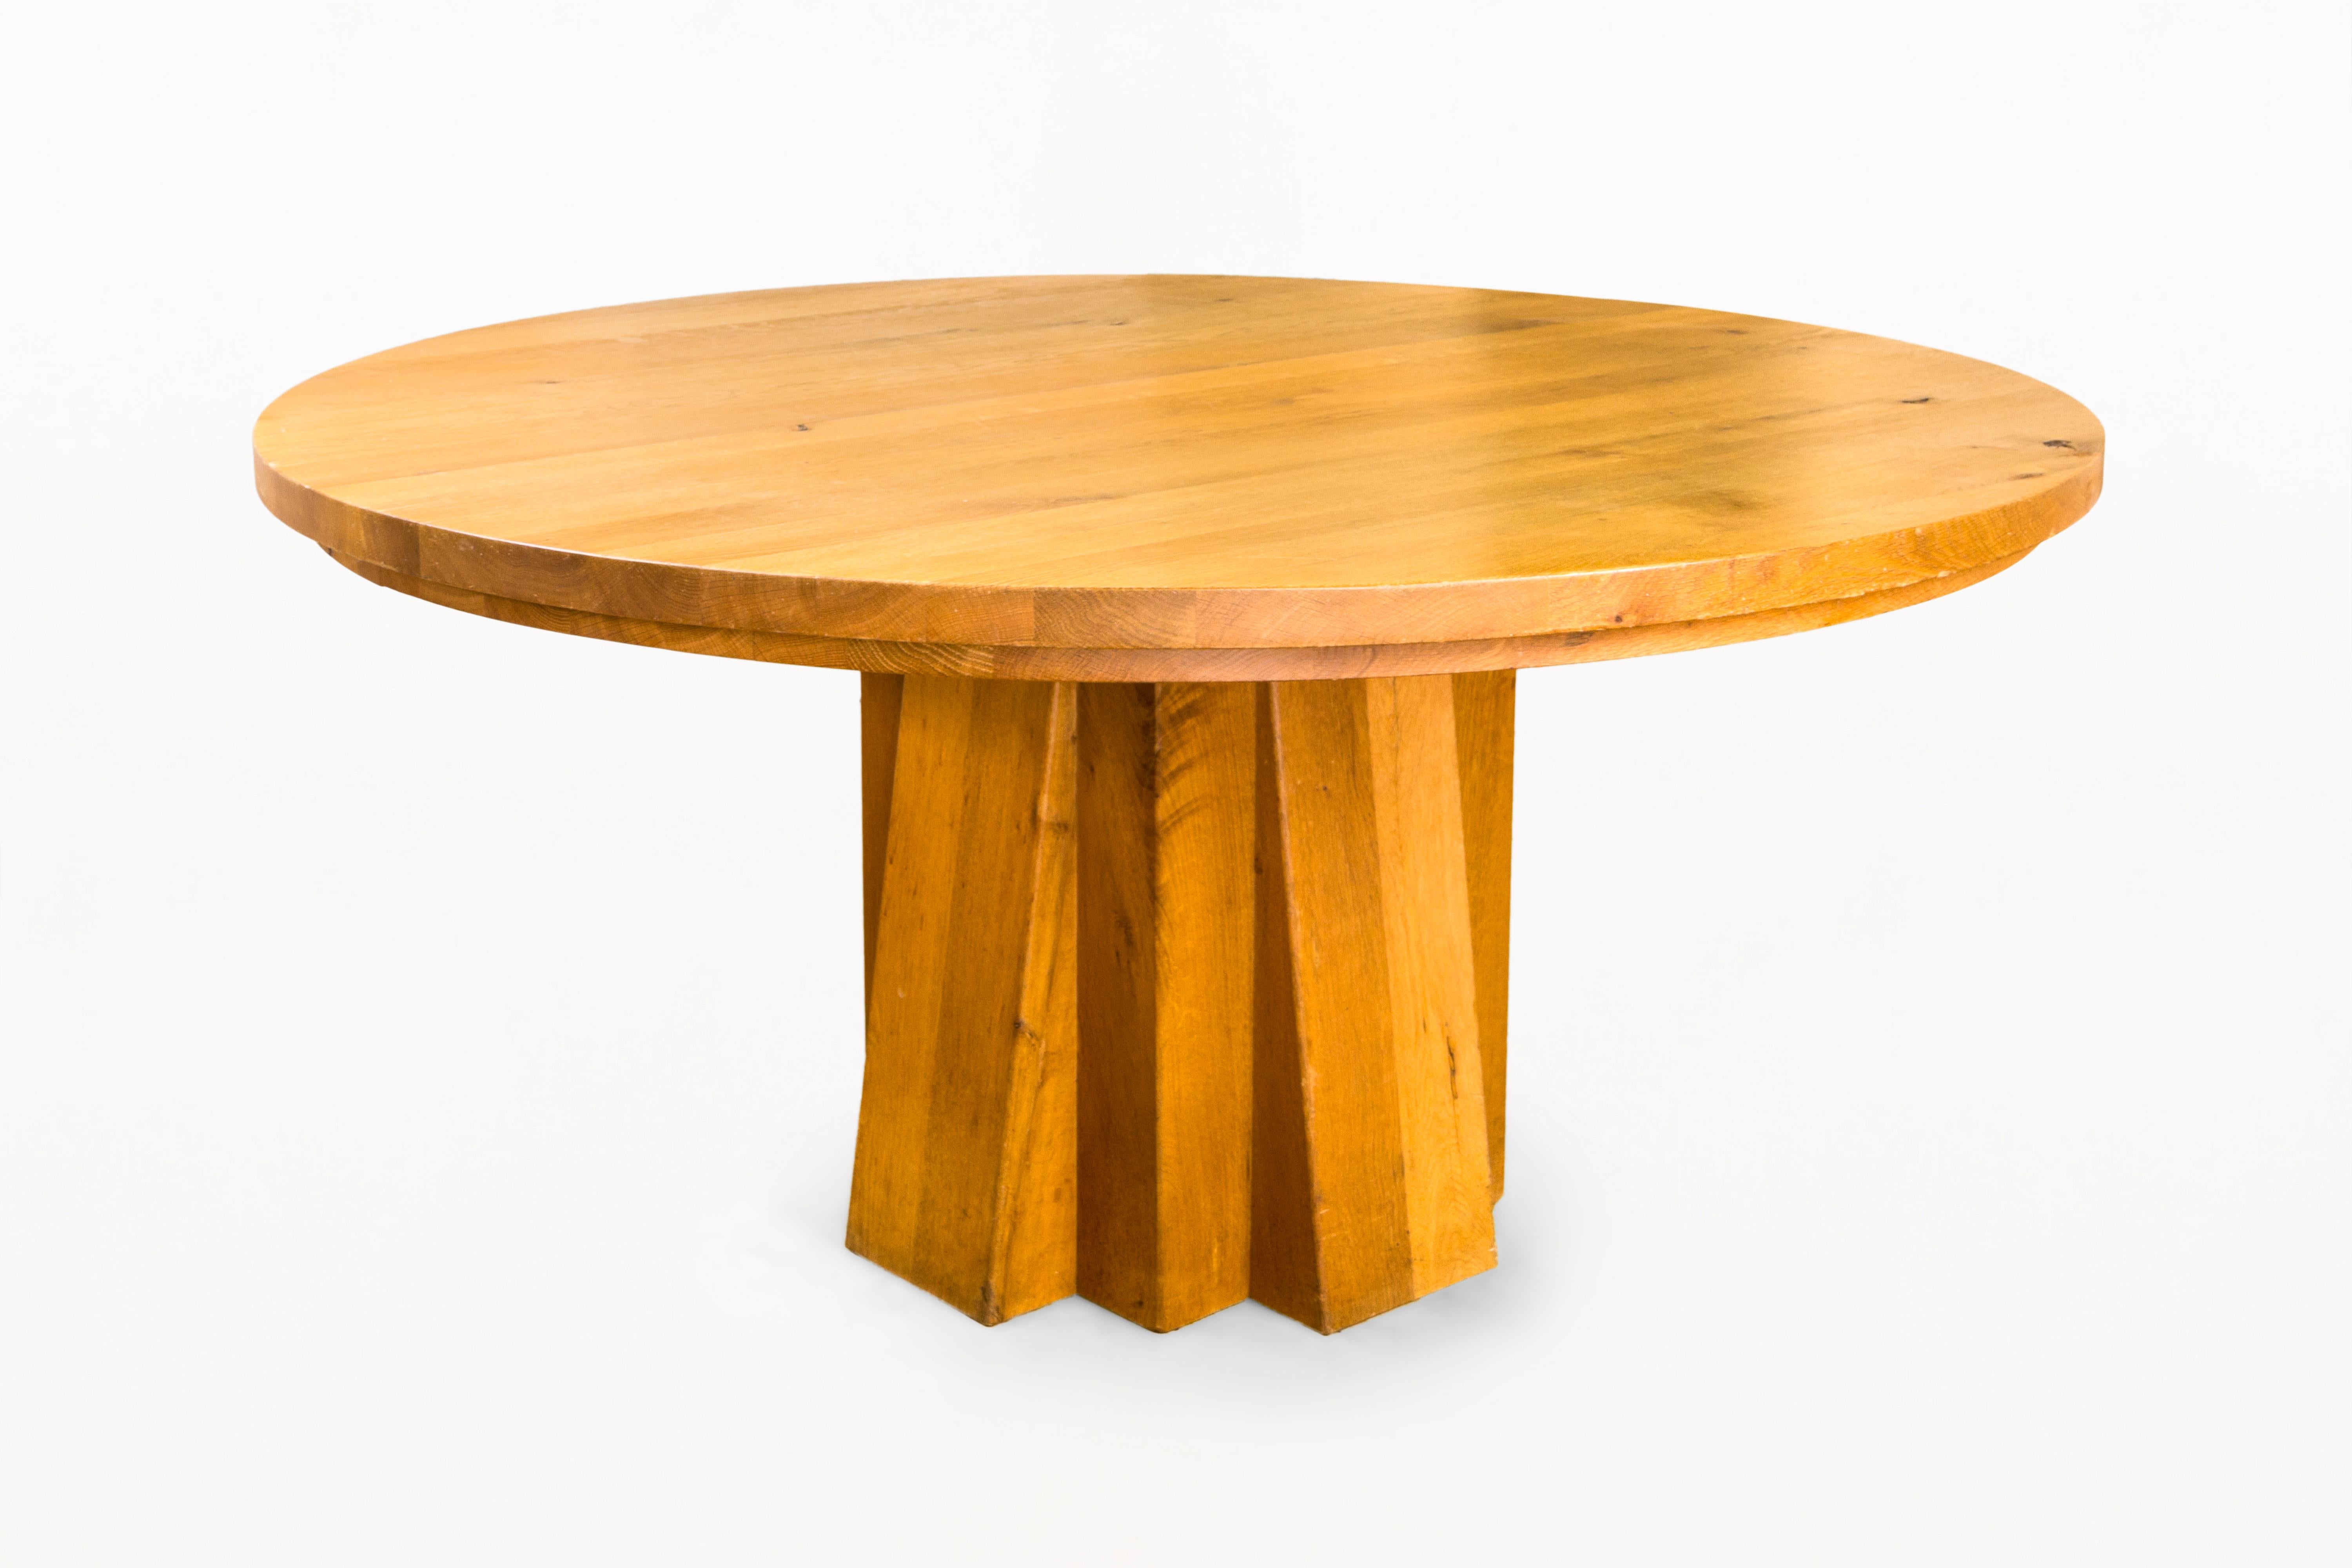 Brutalist oak dining table.
Made with oak.
Circa 1960, France.
Very good vintage condition.
Mid-Century Modern (MCM) is a design movement in interior, product, graphic design, architecture, and urban development that was popular from roughly 1945 to